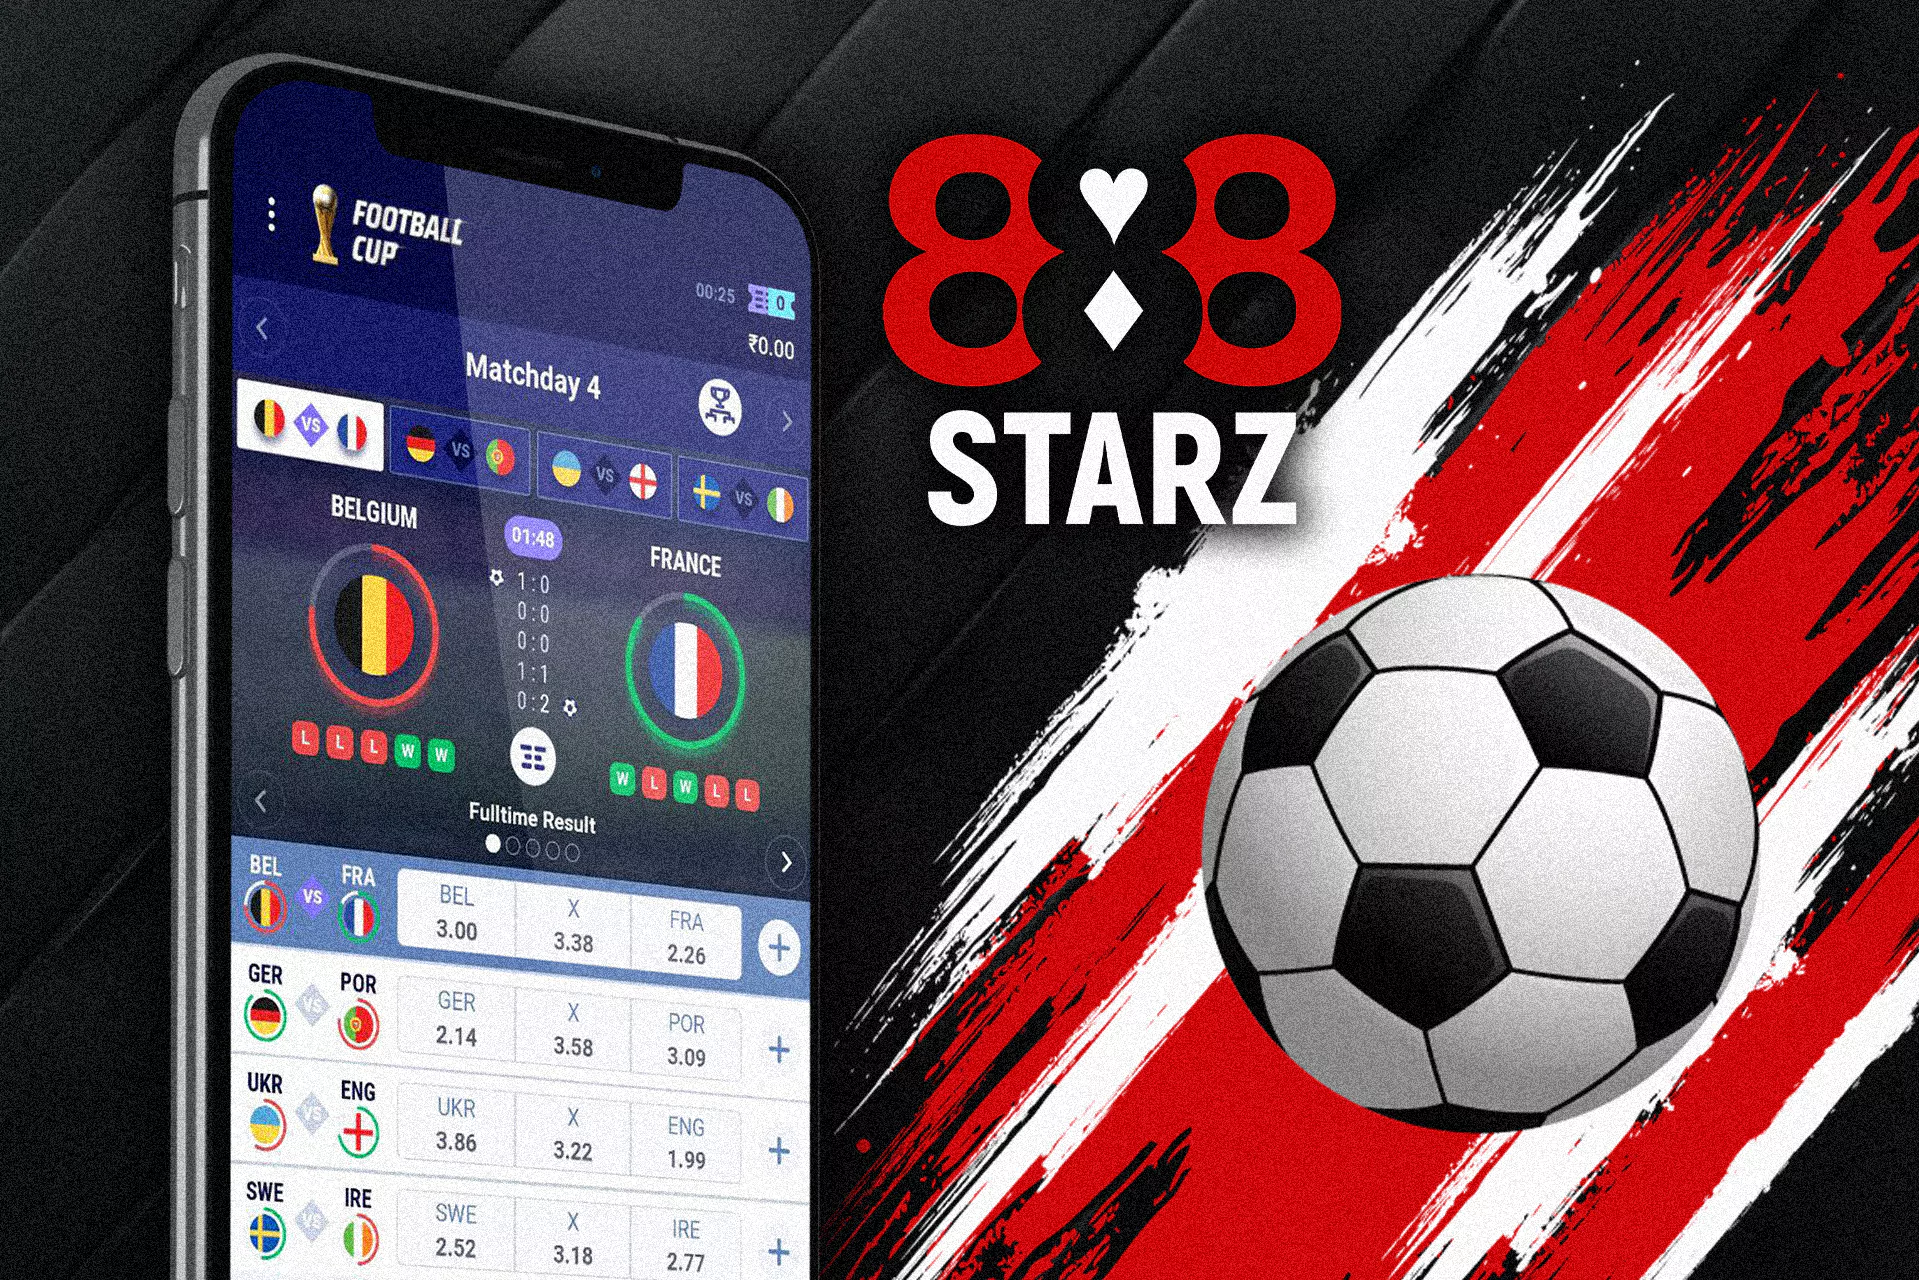 You can create a sports team according to your preferences and place a bet on a match result.